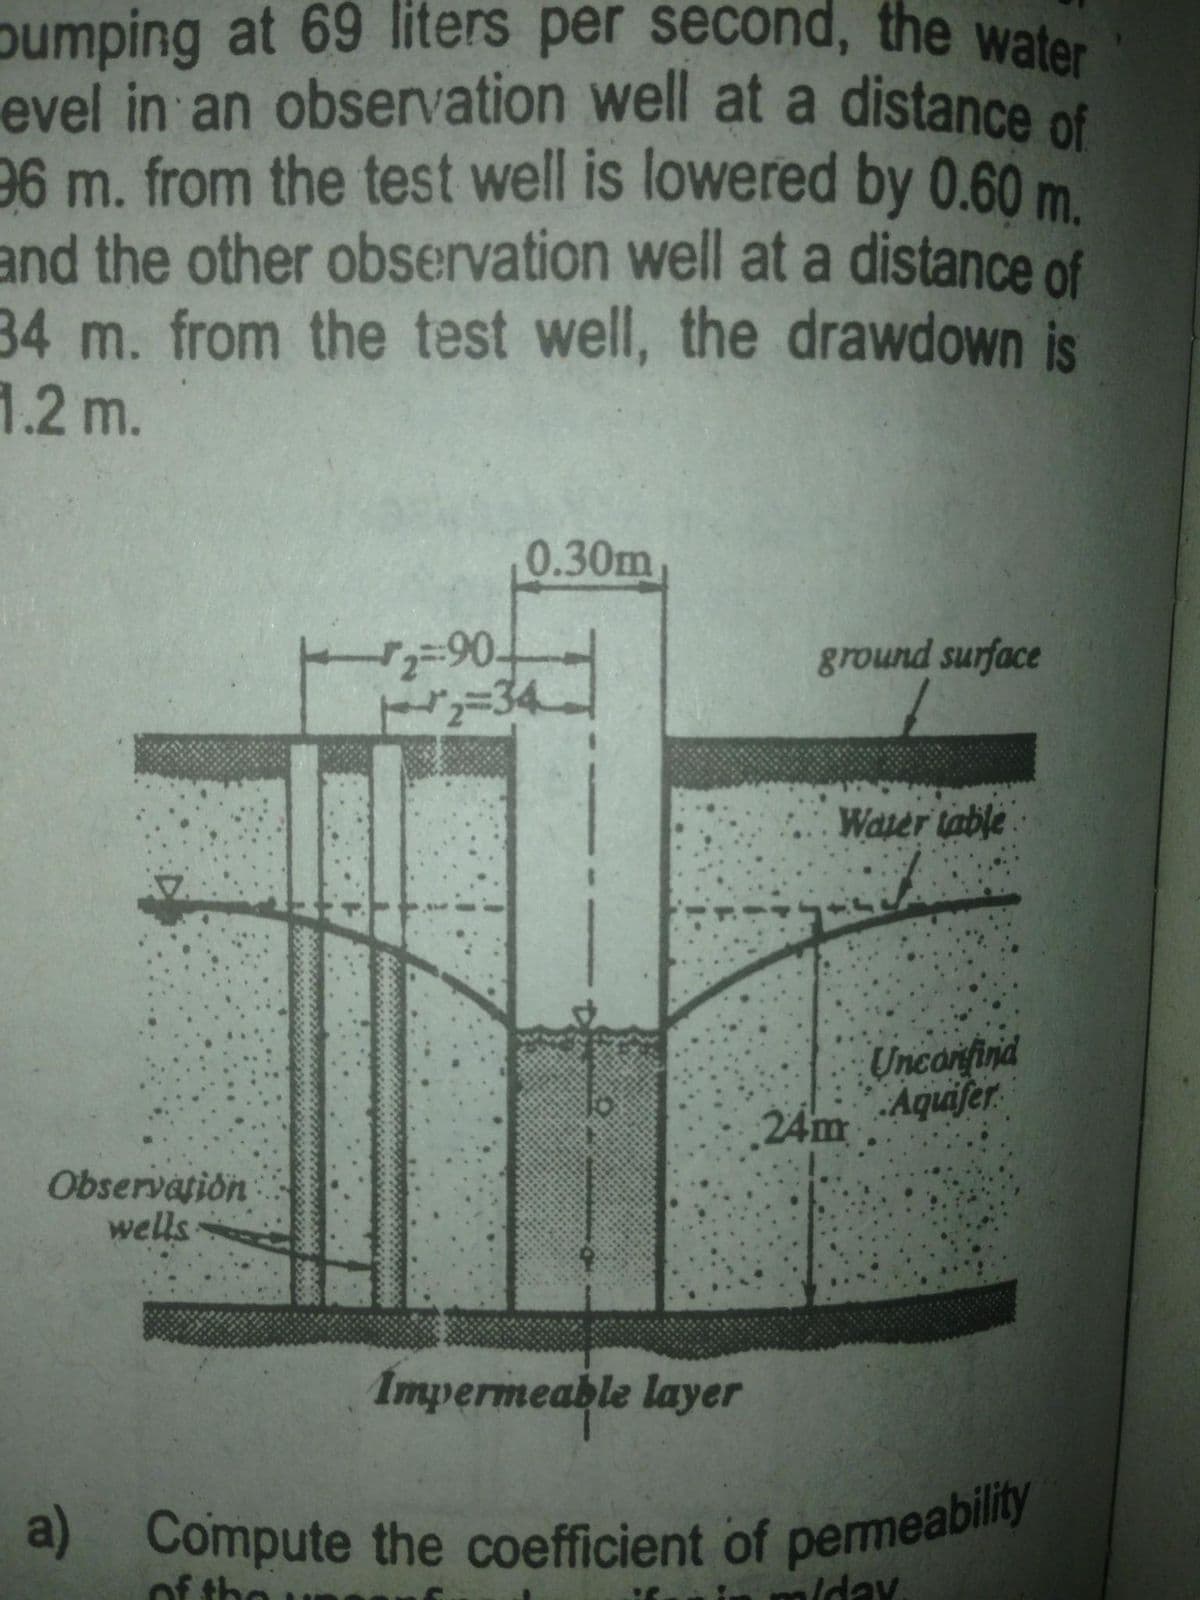 a) Compute the coefficient of permeability
evel in an observation well at a distance of
pumping at 69 liters per second, the water
96 m. from the test well is lowered by 0.60 m
and the other observation well at a distance of
34 m. from the test well, the drawdown is
1.2 m.
0.30m
ground surface
=34
Waser table
Uncorfinid
.24m.
Aquifer
Observation
wells
Impermeable layer
a) Compute the coefficient of permeabilily
of
th
m/day.
